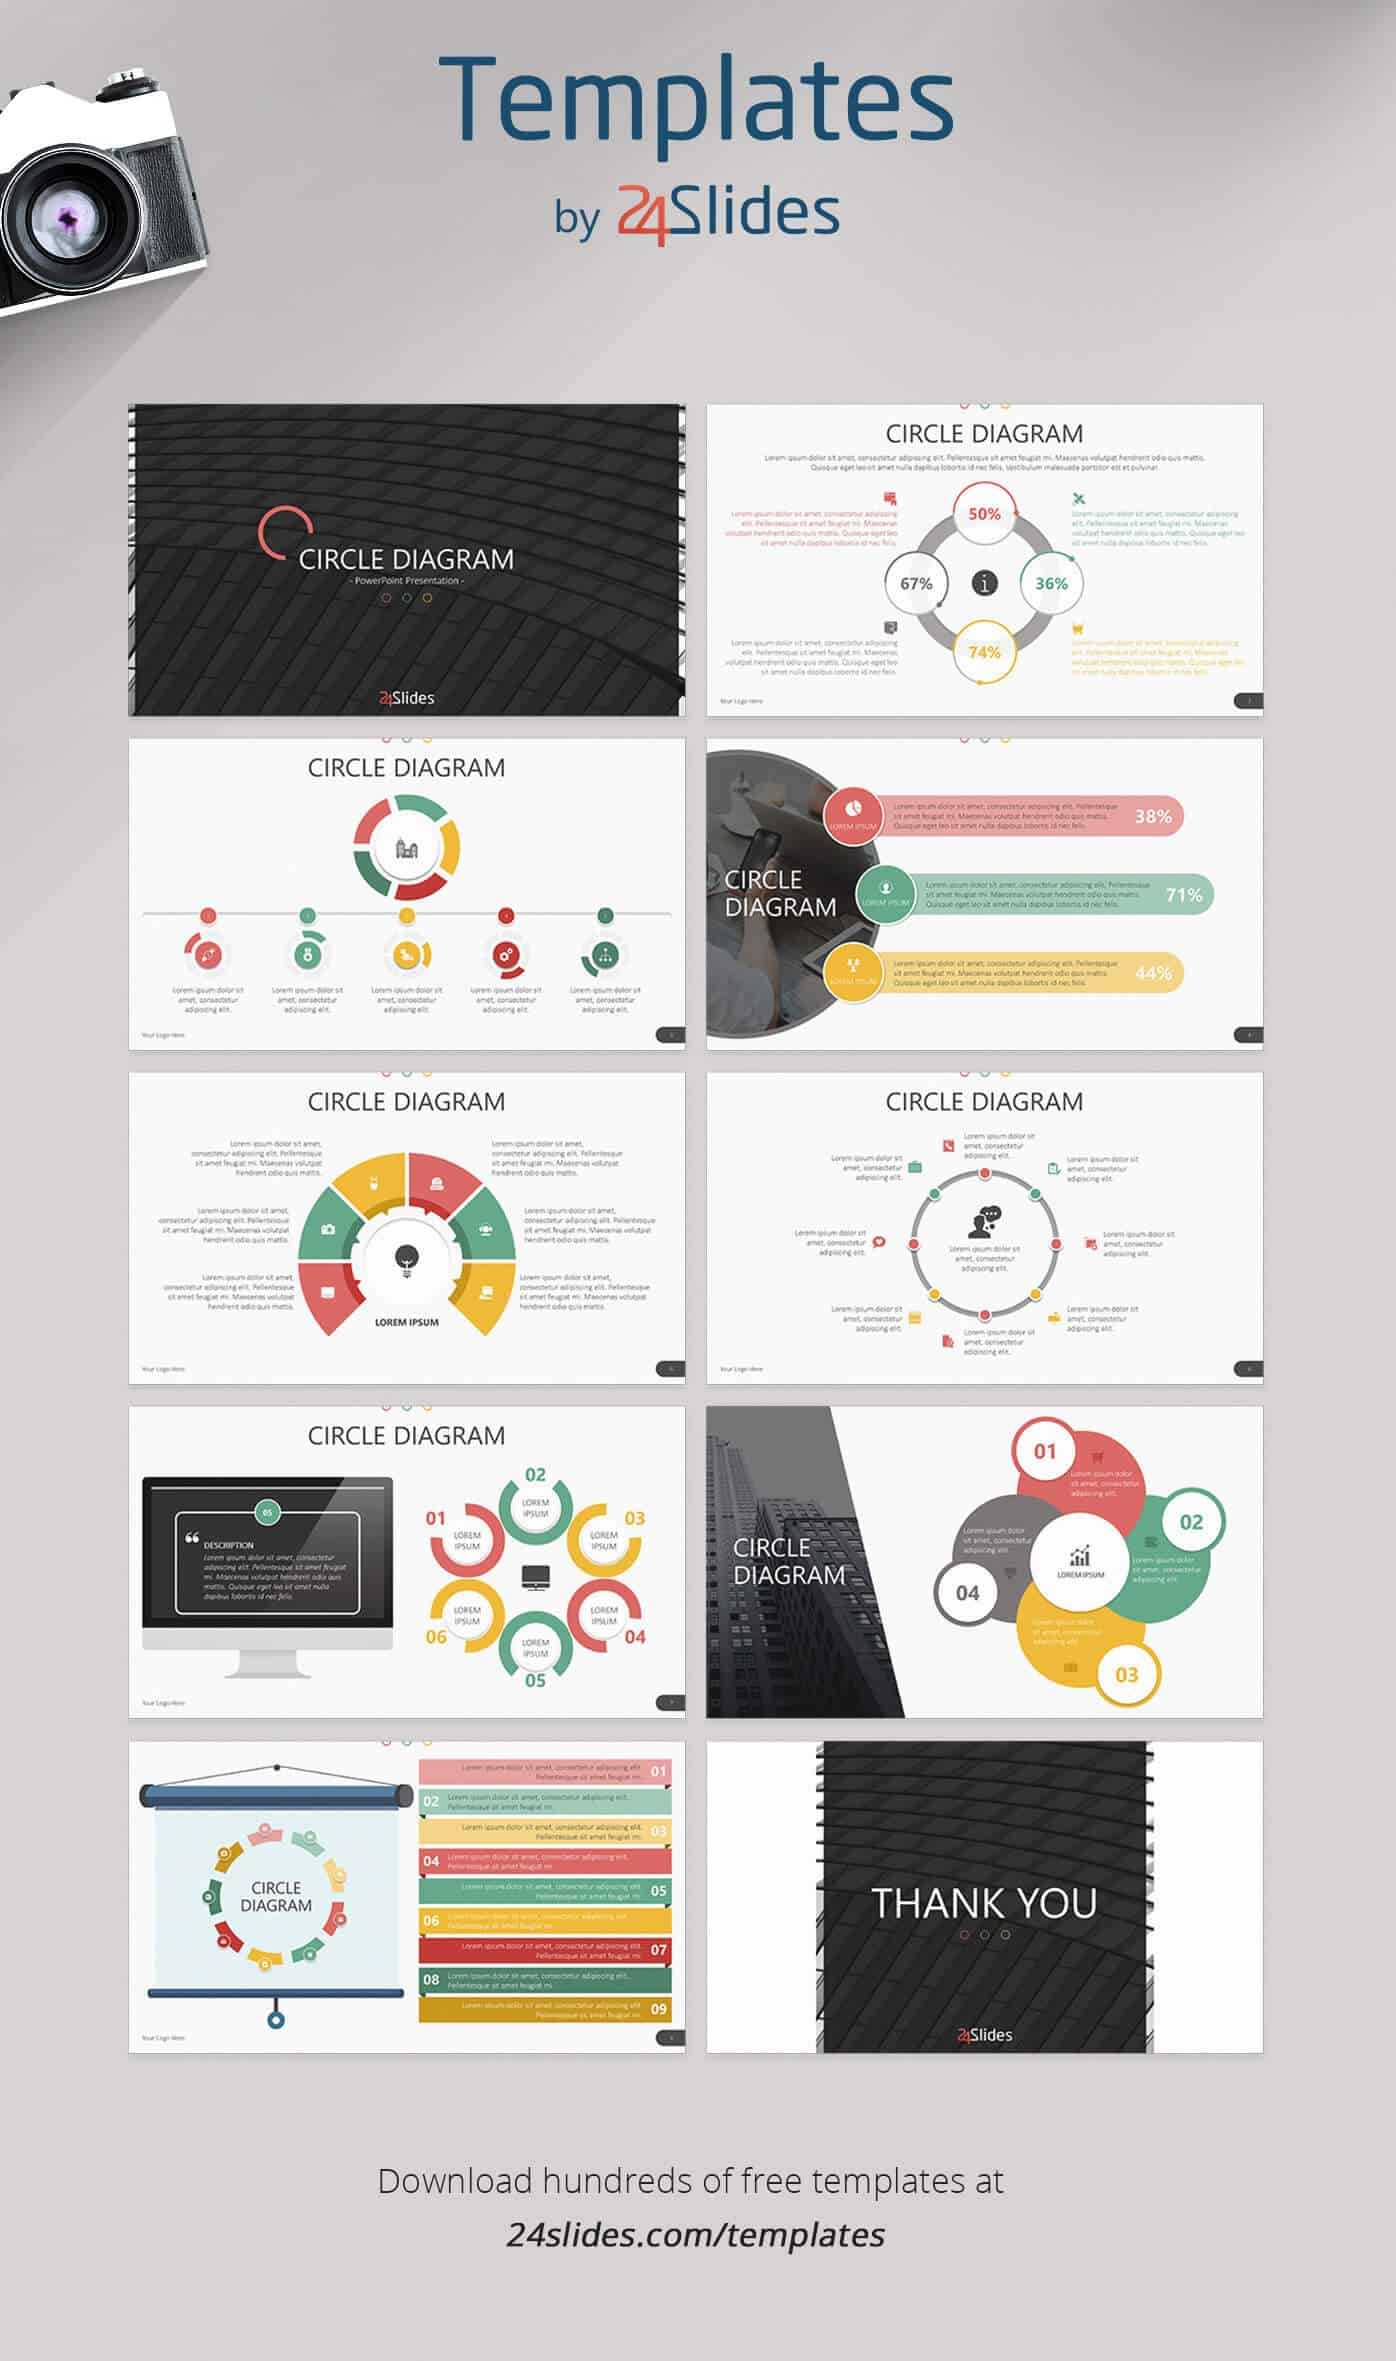 15 Fun And Colorful Free Powerpoint Templates | Present Better With Fun Powerpoint Templates Free Download